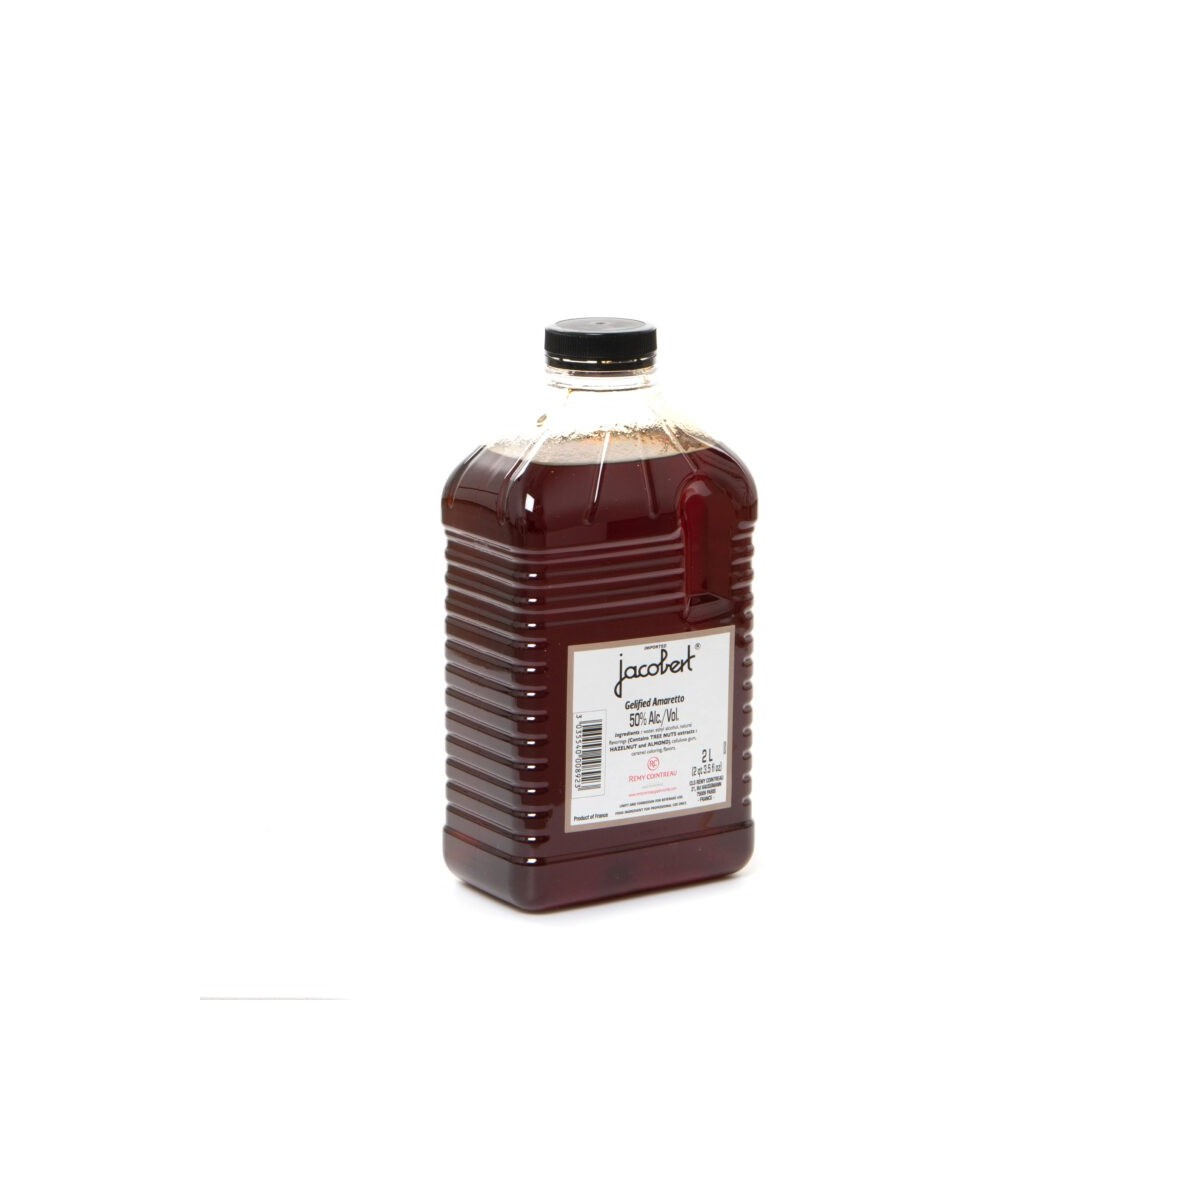 AMARETTO GEL CONCENTRATED 50% 6 X 2 LITERS  BOTTLE 